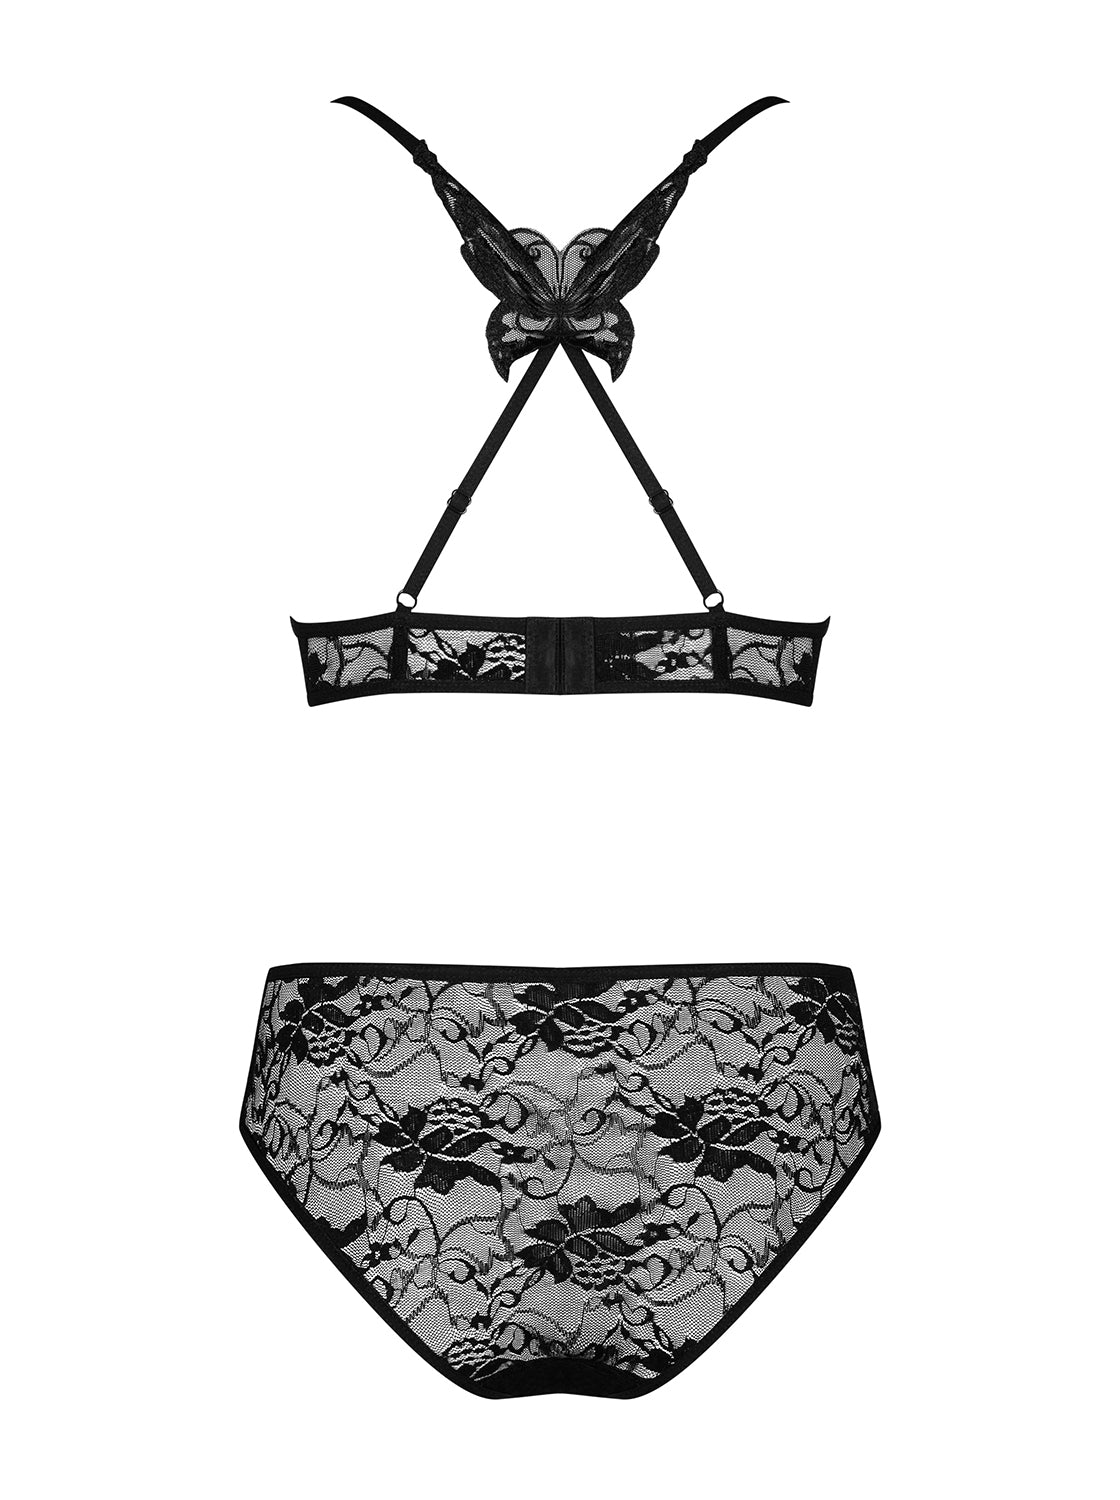 Kokietta a feminine, black lingerie set made of transparent and elastic material with a subtle floral pattern